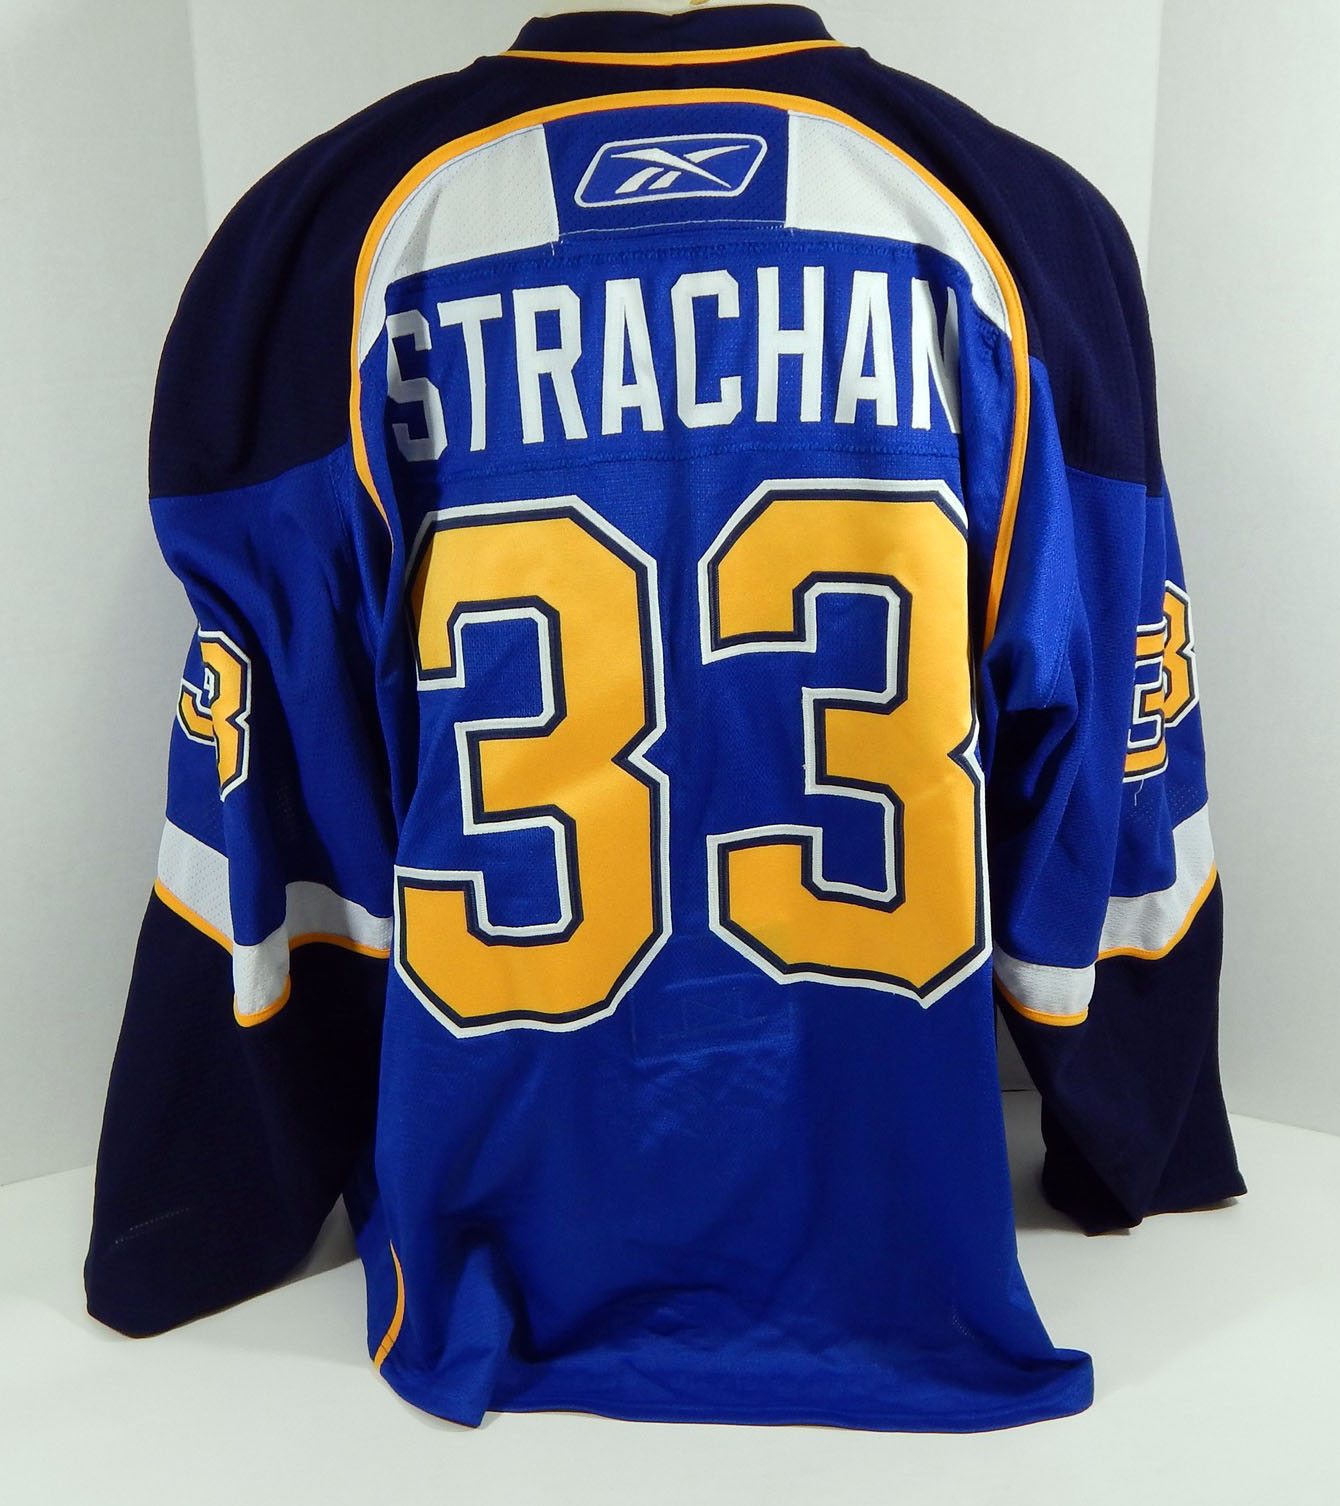 2009-10 St. Louis Ranking integrated 1st place Blues Tyson Strachan Game Blue Issued Max 76% OFF #33 Jers